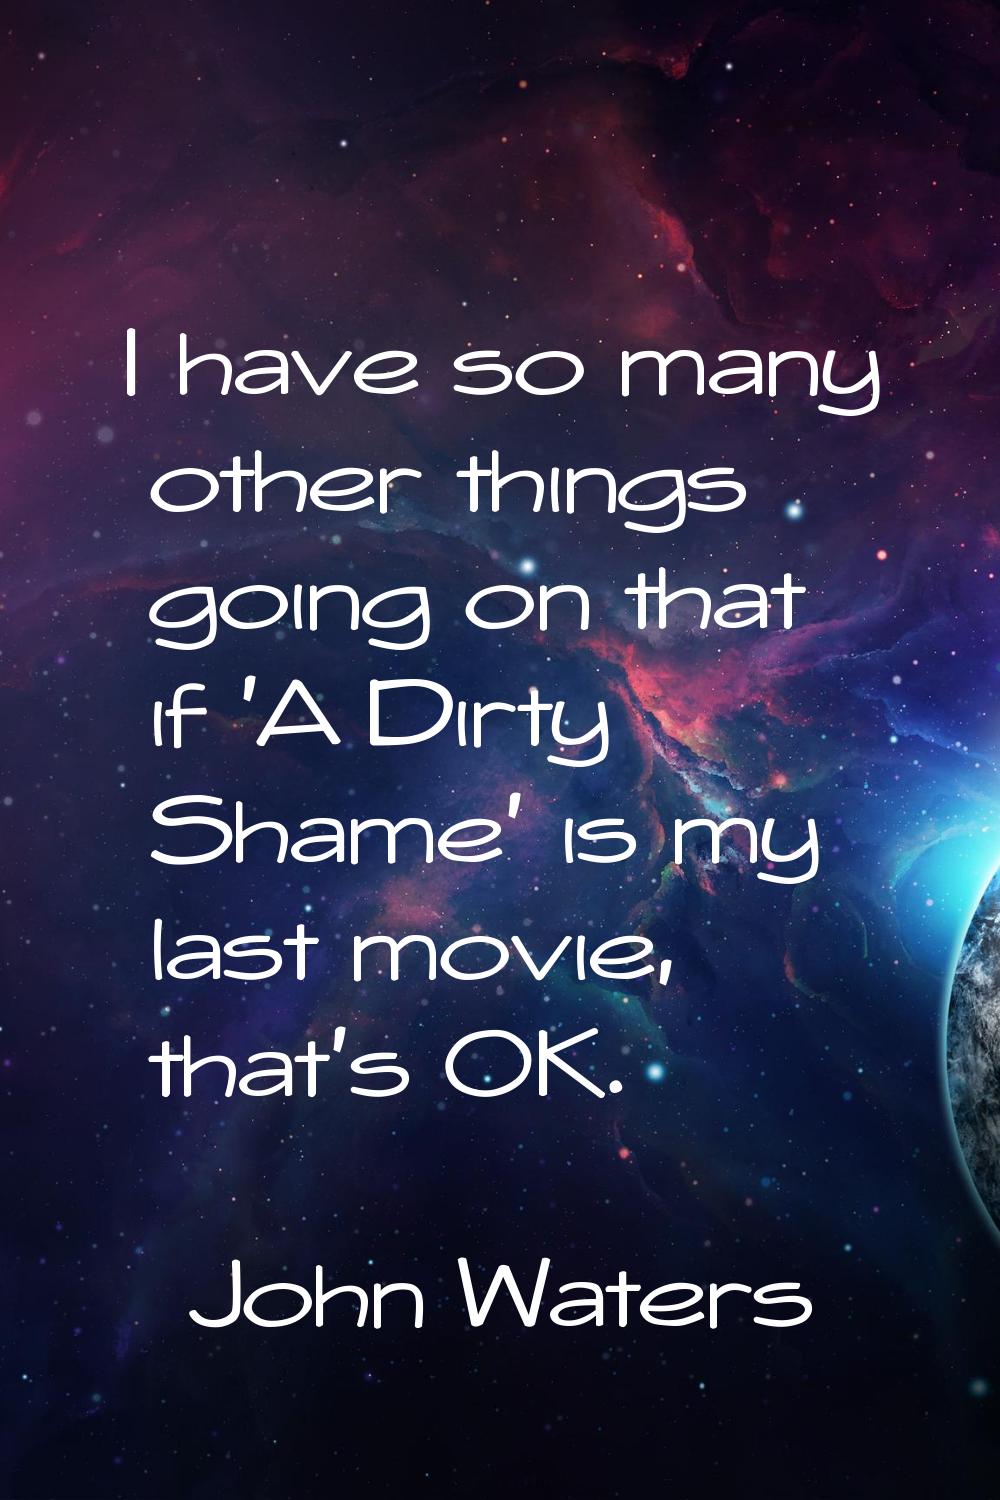 I have so many other things going on that if 'A Dirty Shame' is my last movie, that's OK.